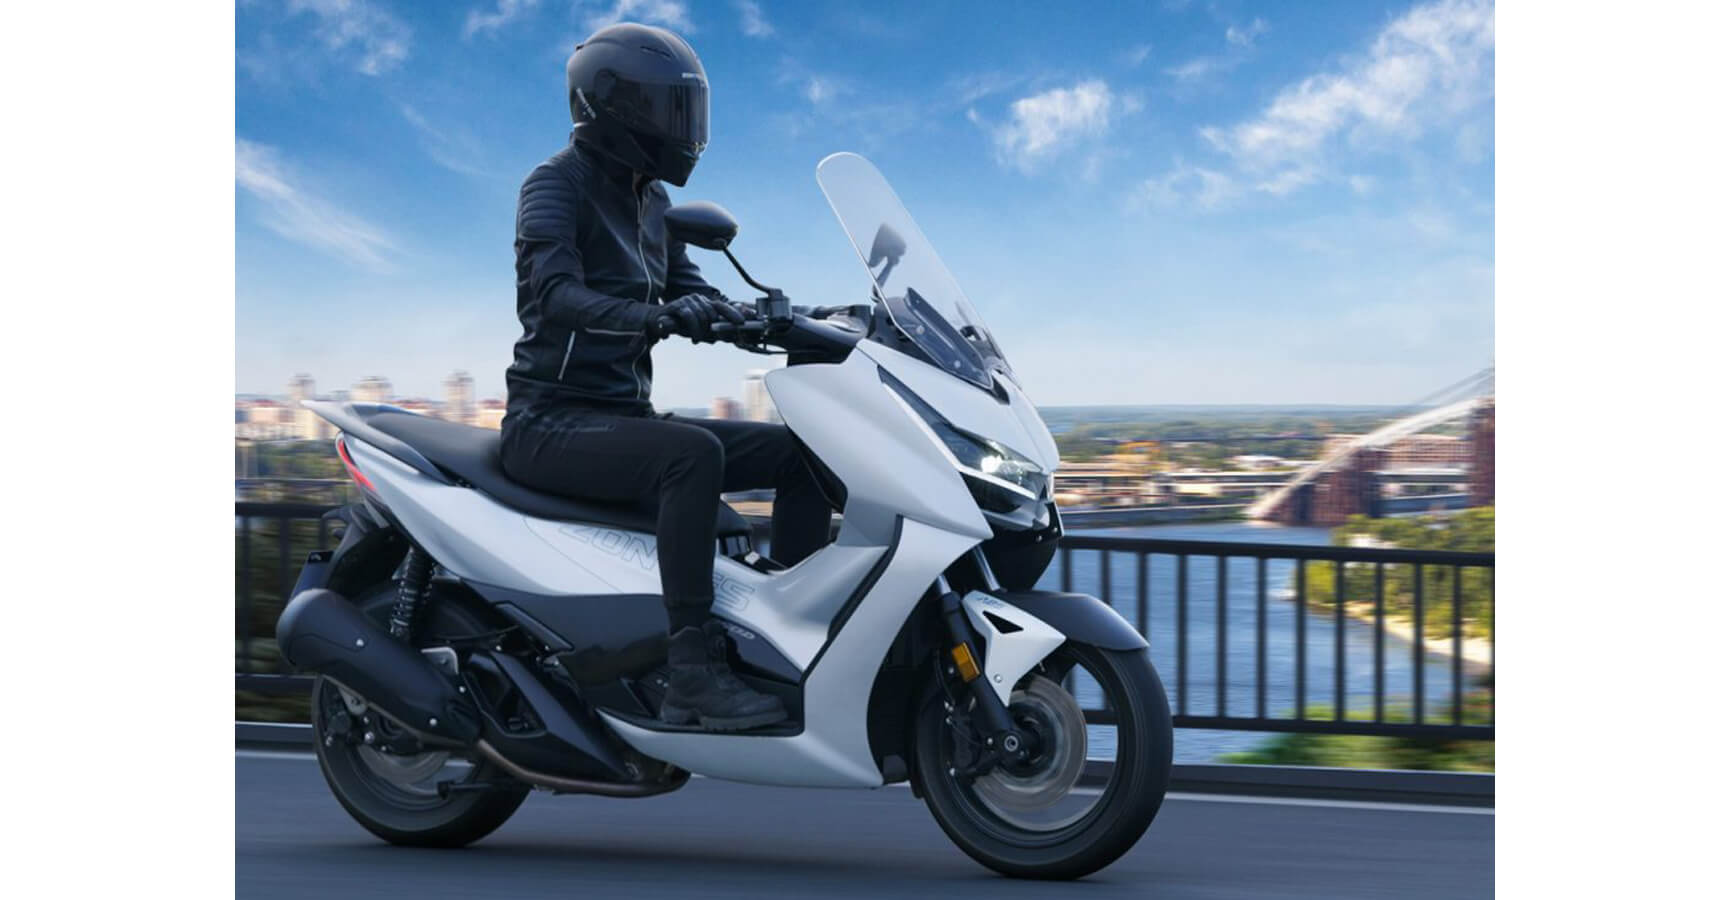 Zontes 350d Maxi Scooter Launched in European